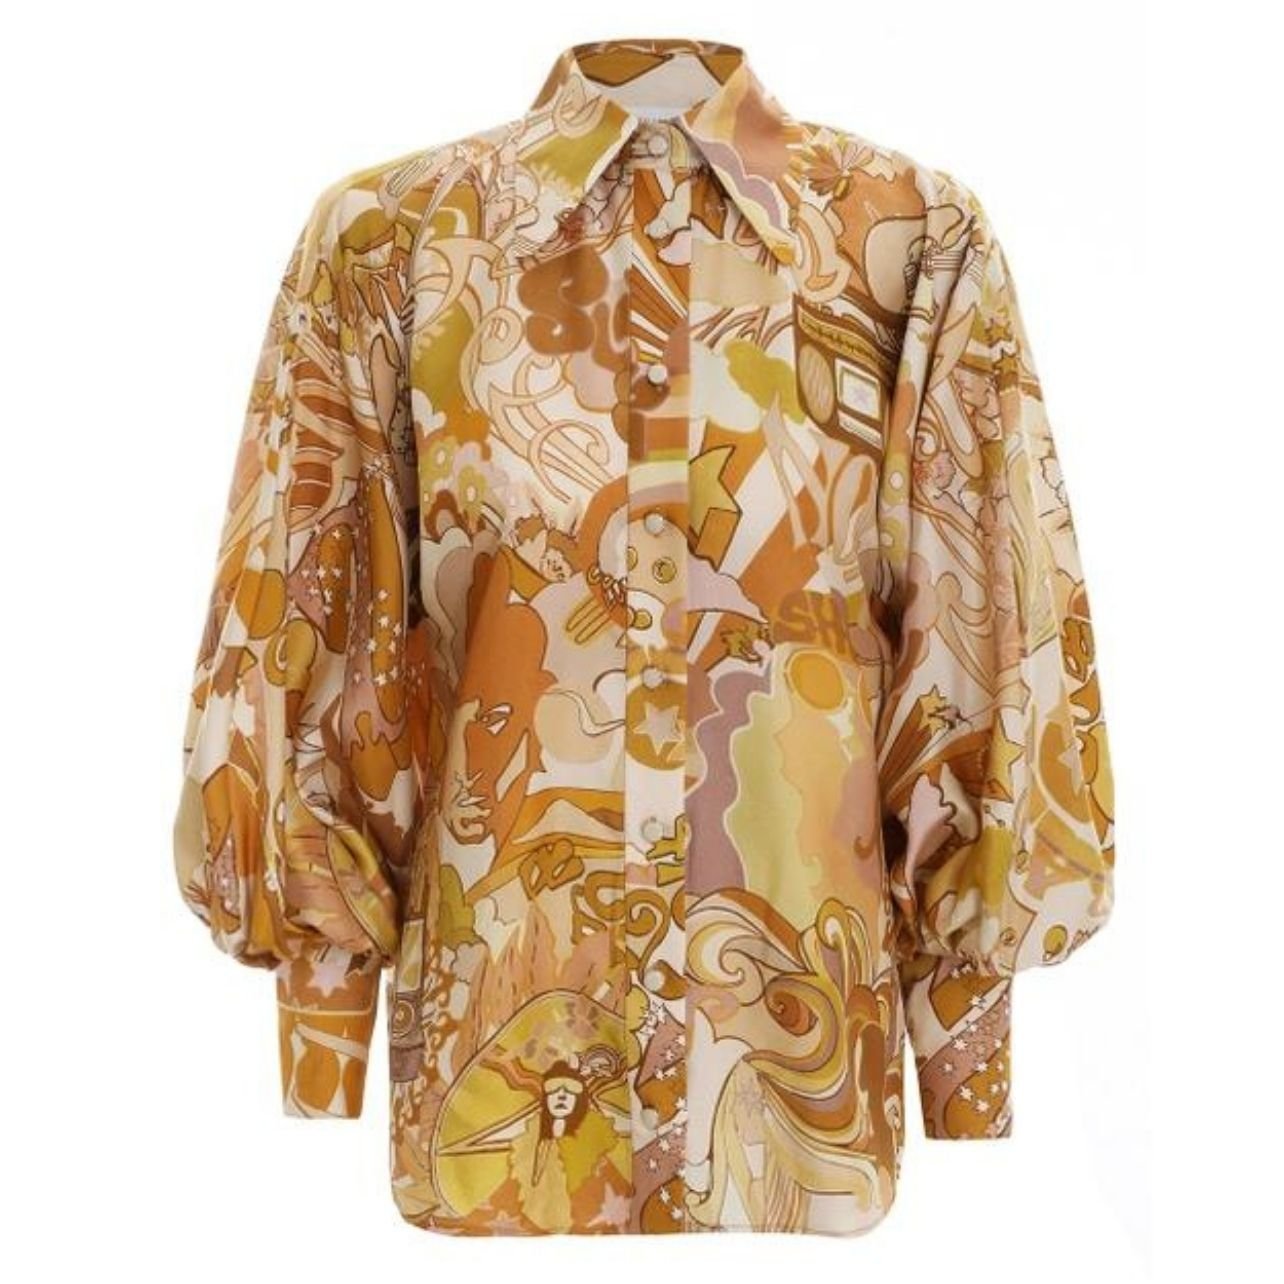 Zimmermann retro style button-up collared blouse